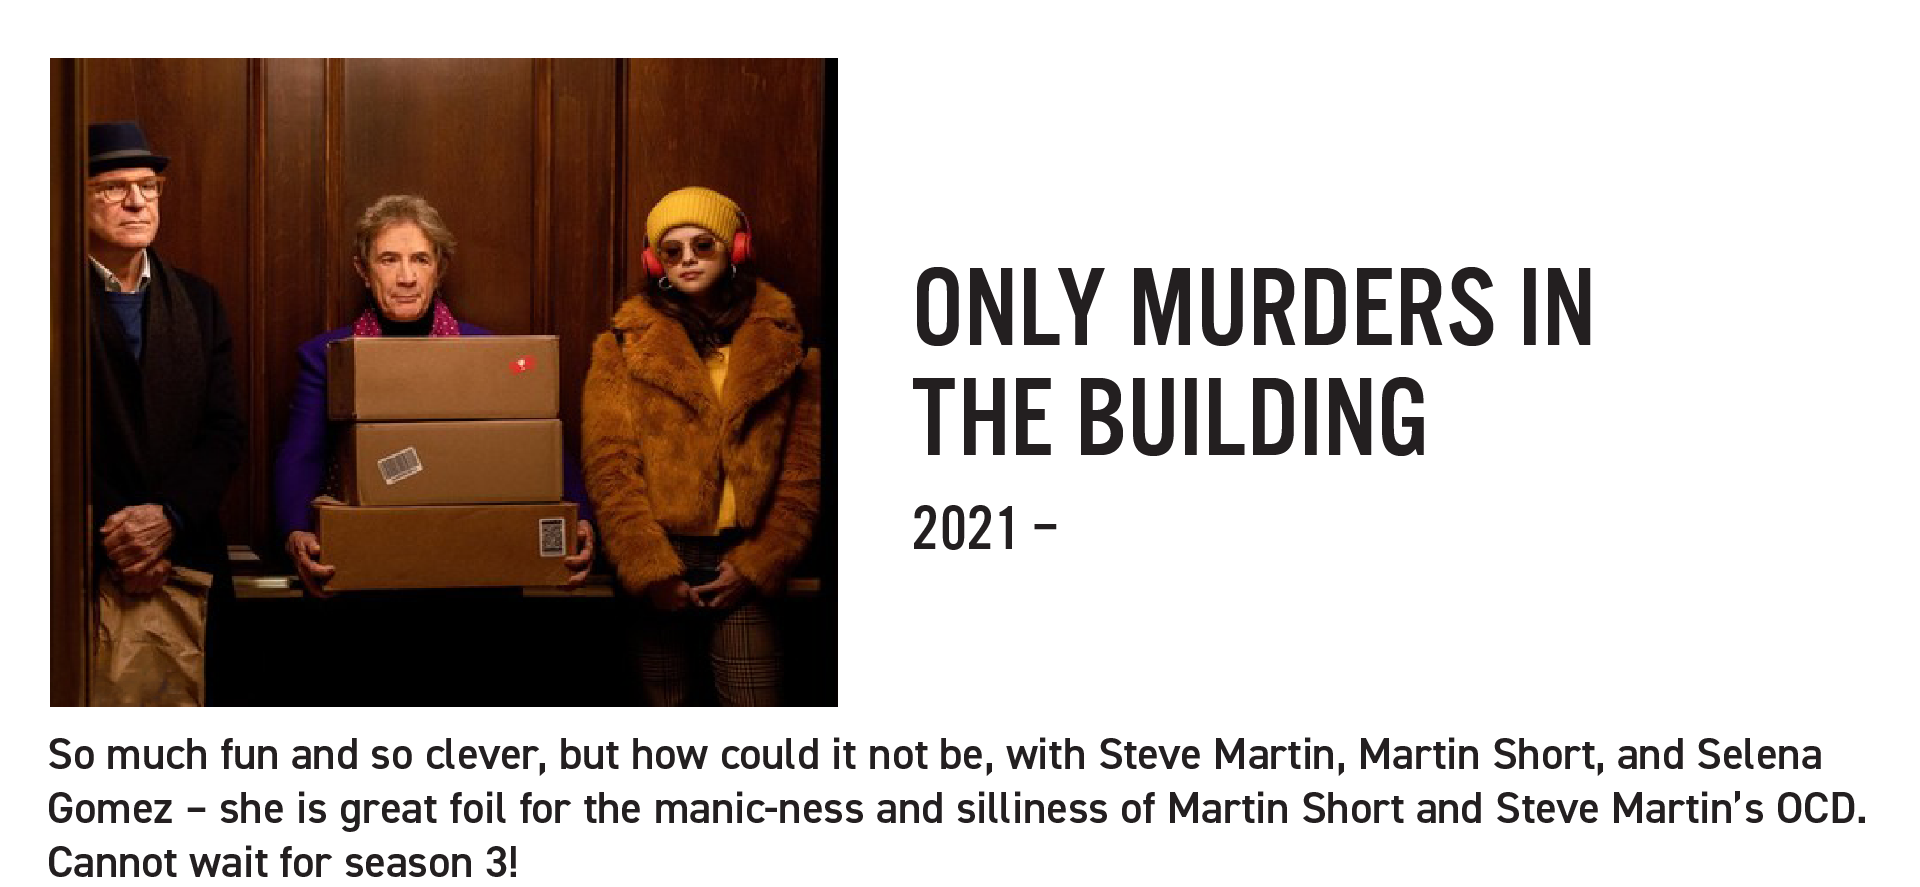 06 - Only Murders in the Building